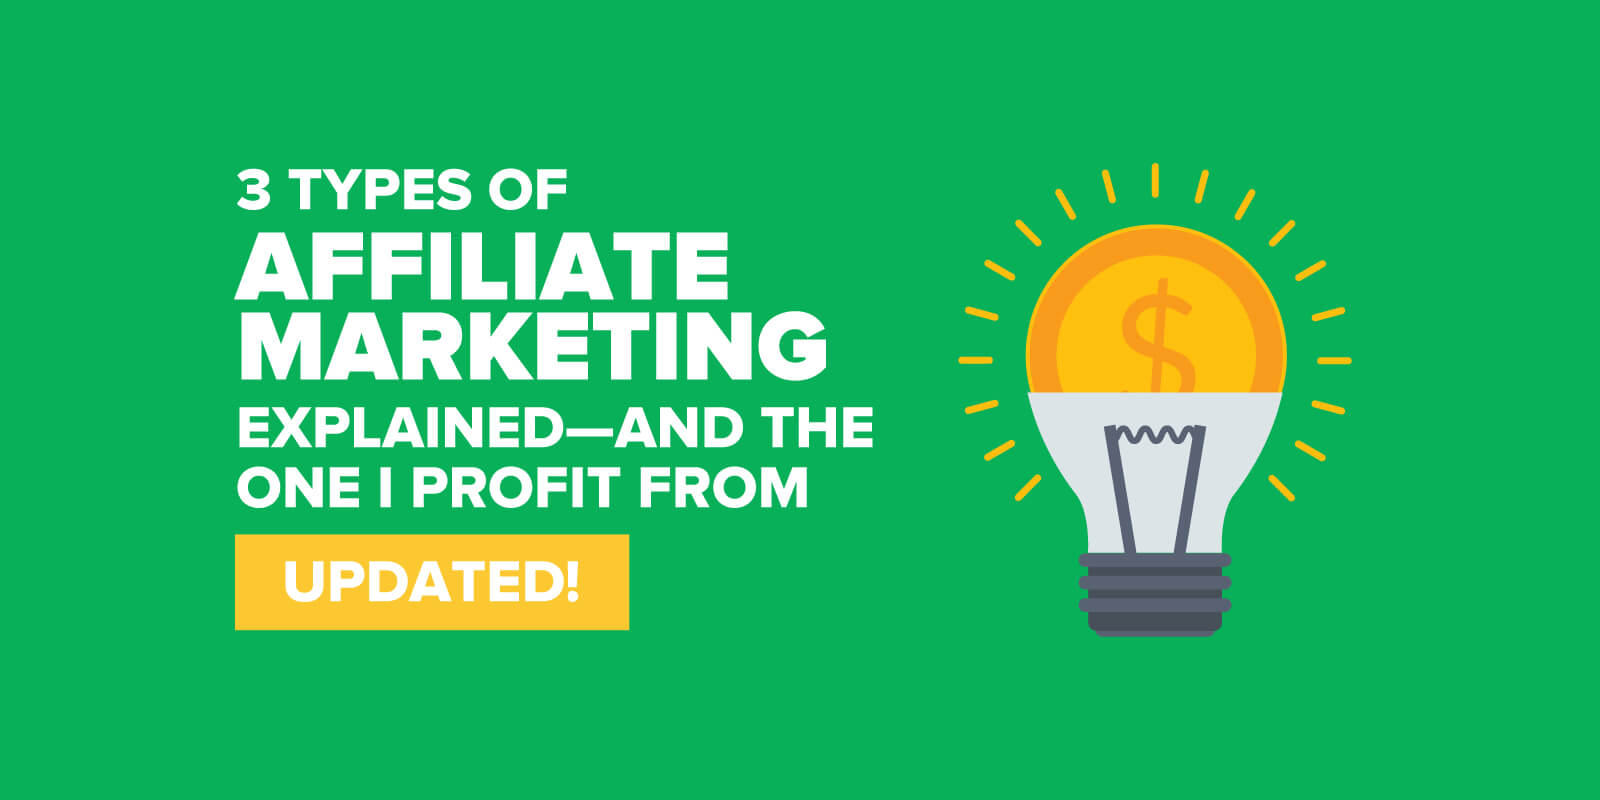 3 Types of Affiliate Marketing Explained—and The One I Profit From—UPDATED!